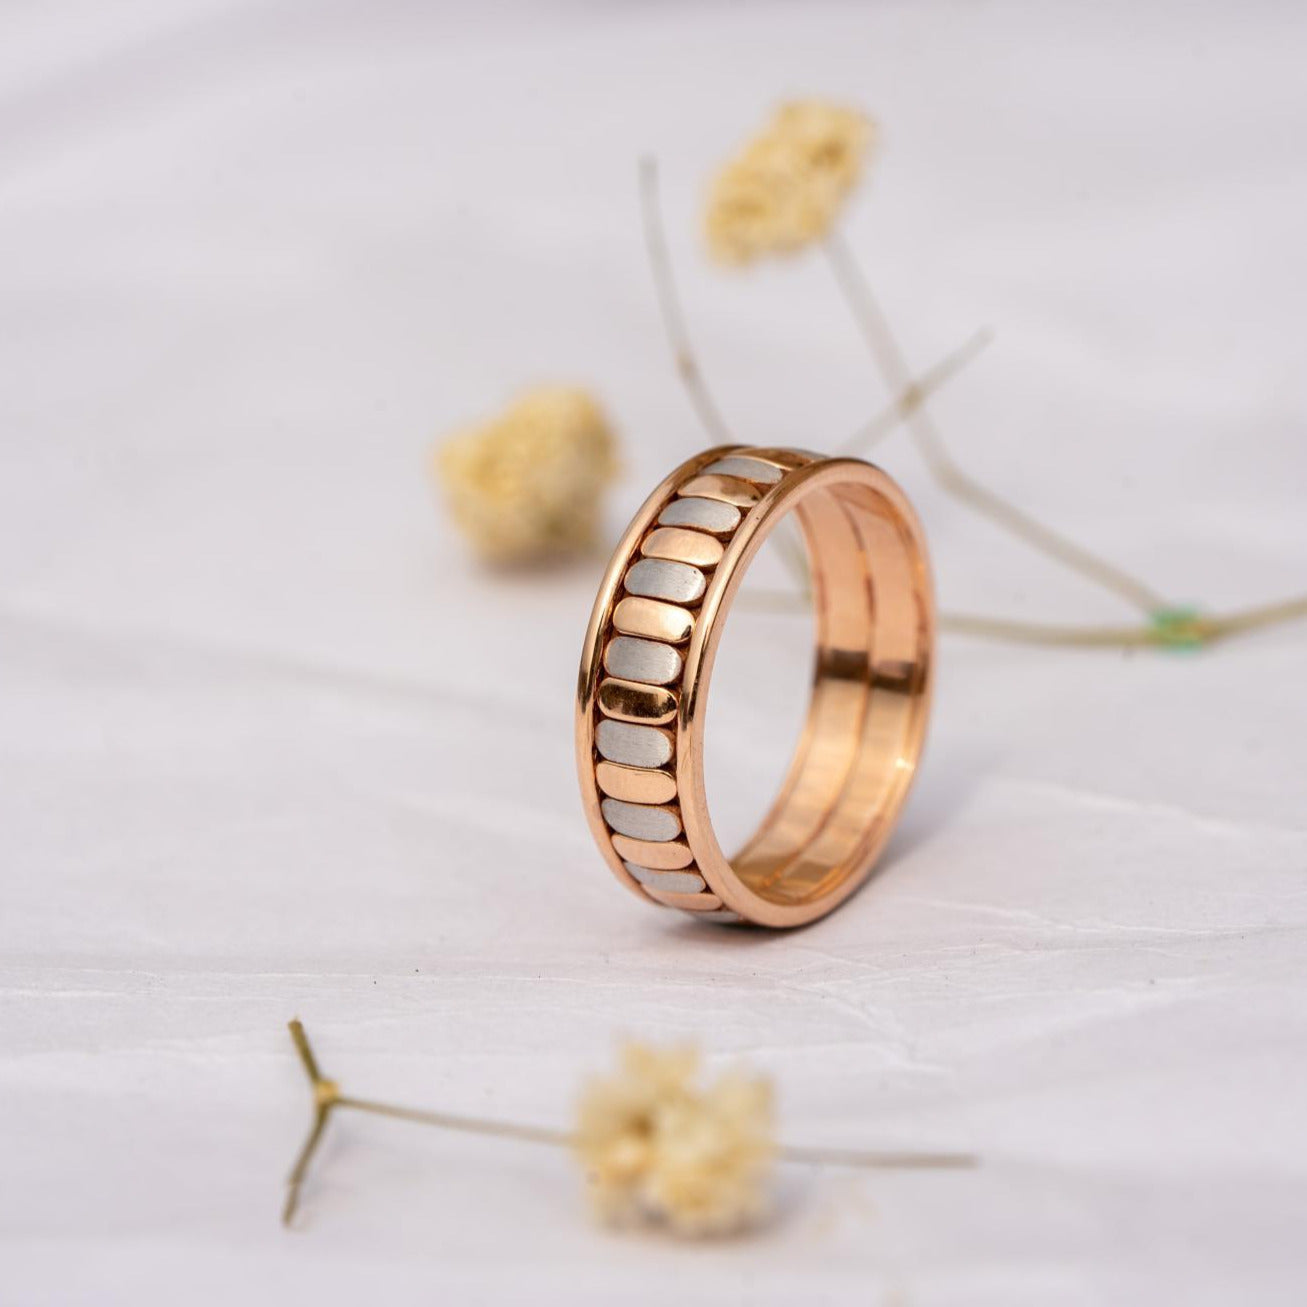 Rose gold Wedding Bands,6 mm Traditional Wedding Band